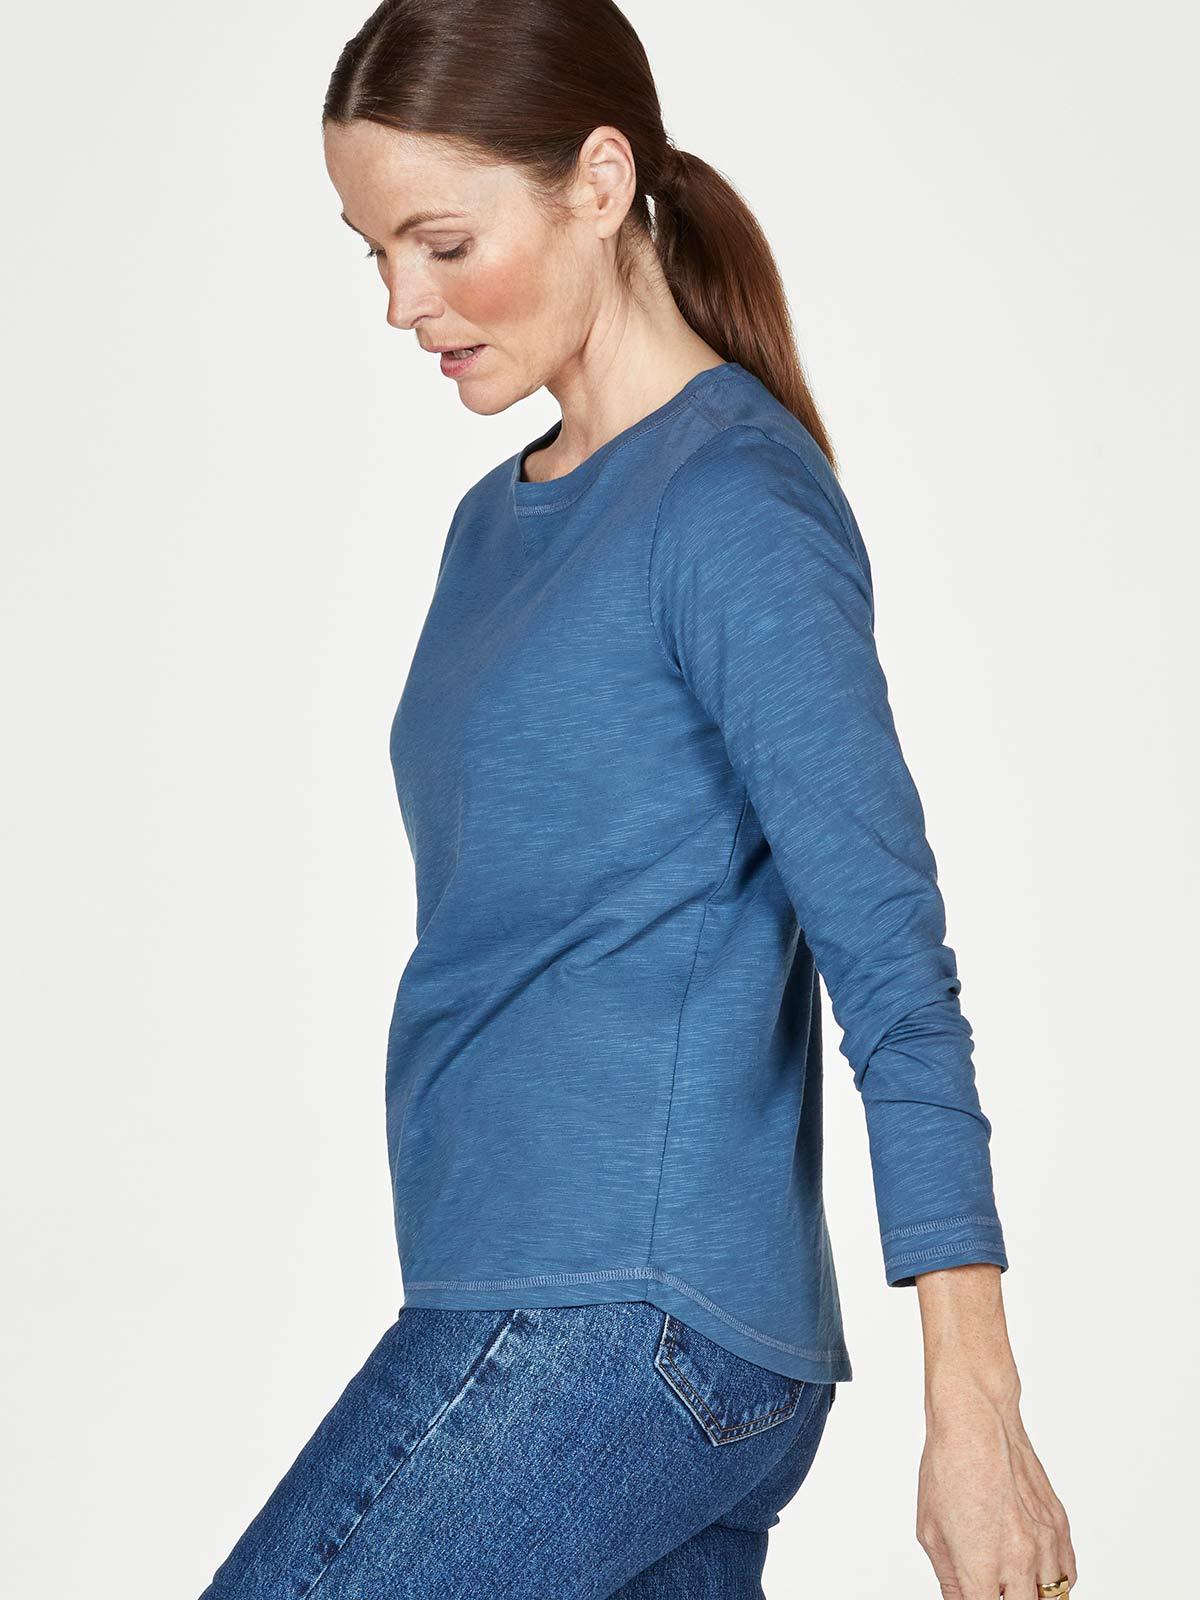 Fairtrade GOTs Organic Cotton Long Sleeve Jersey Top - Thought Clothing UK